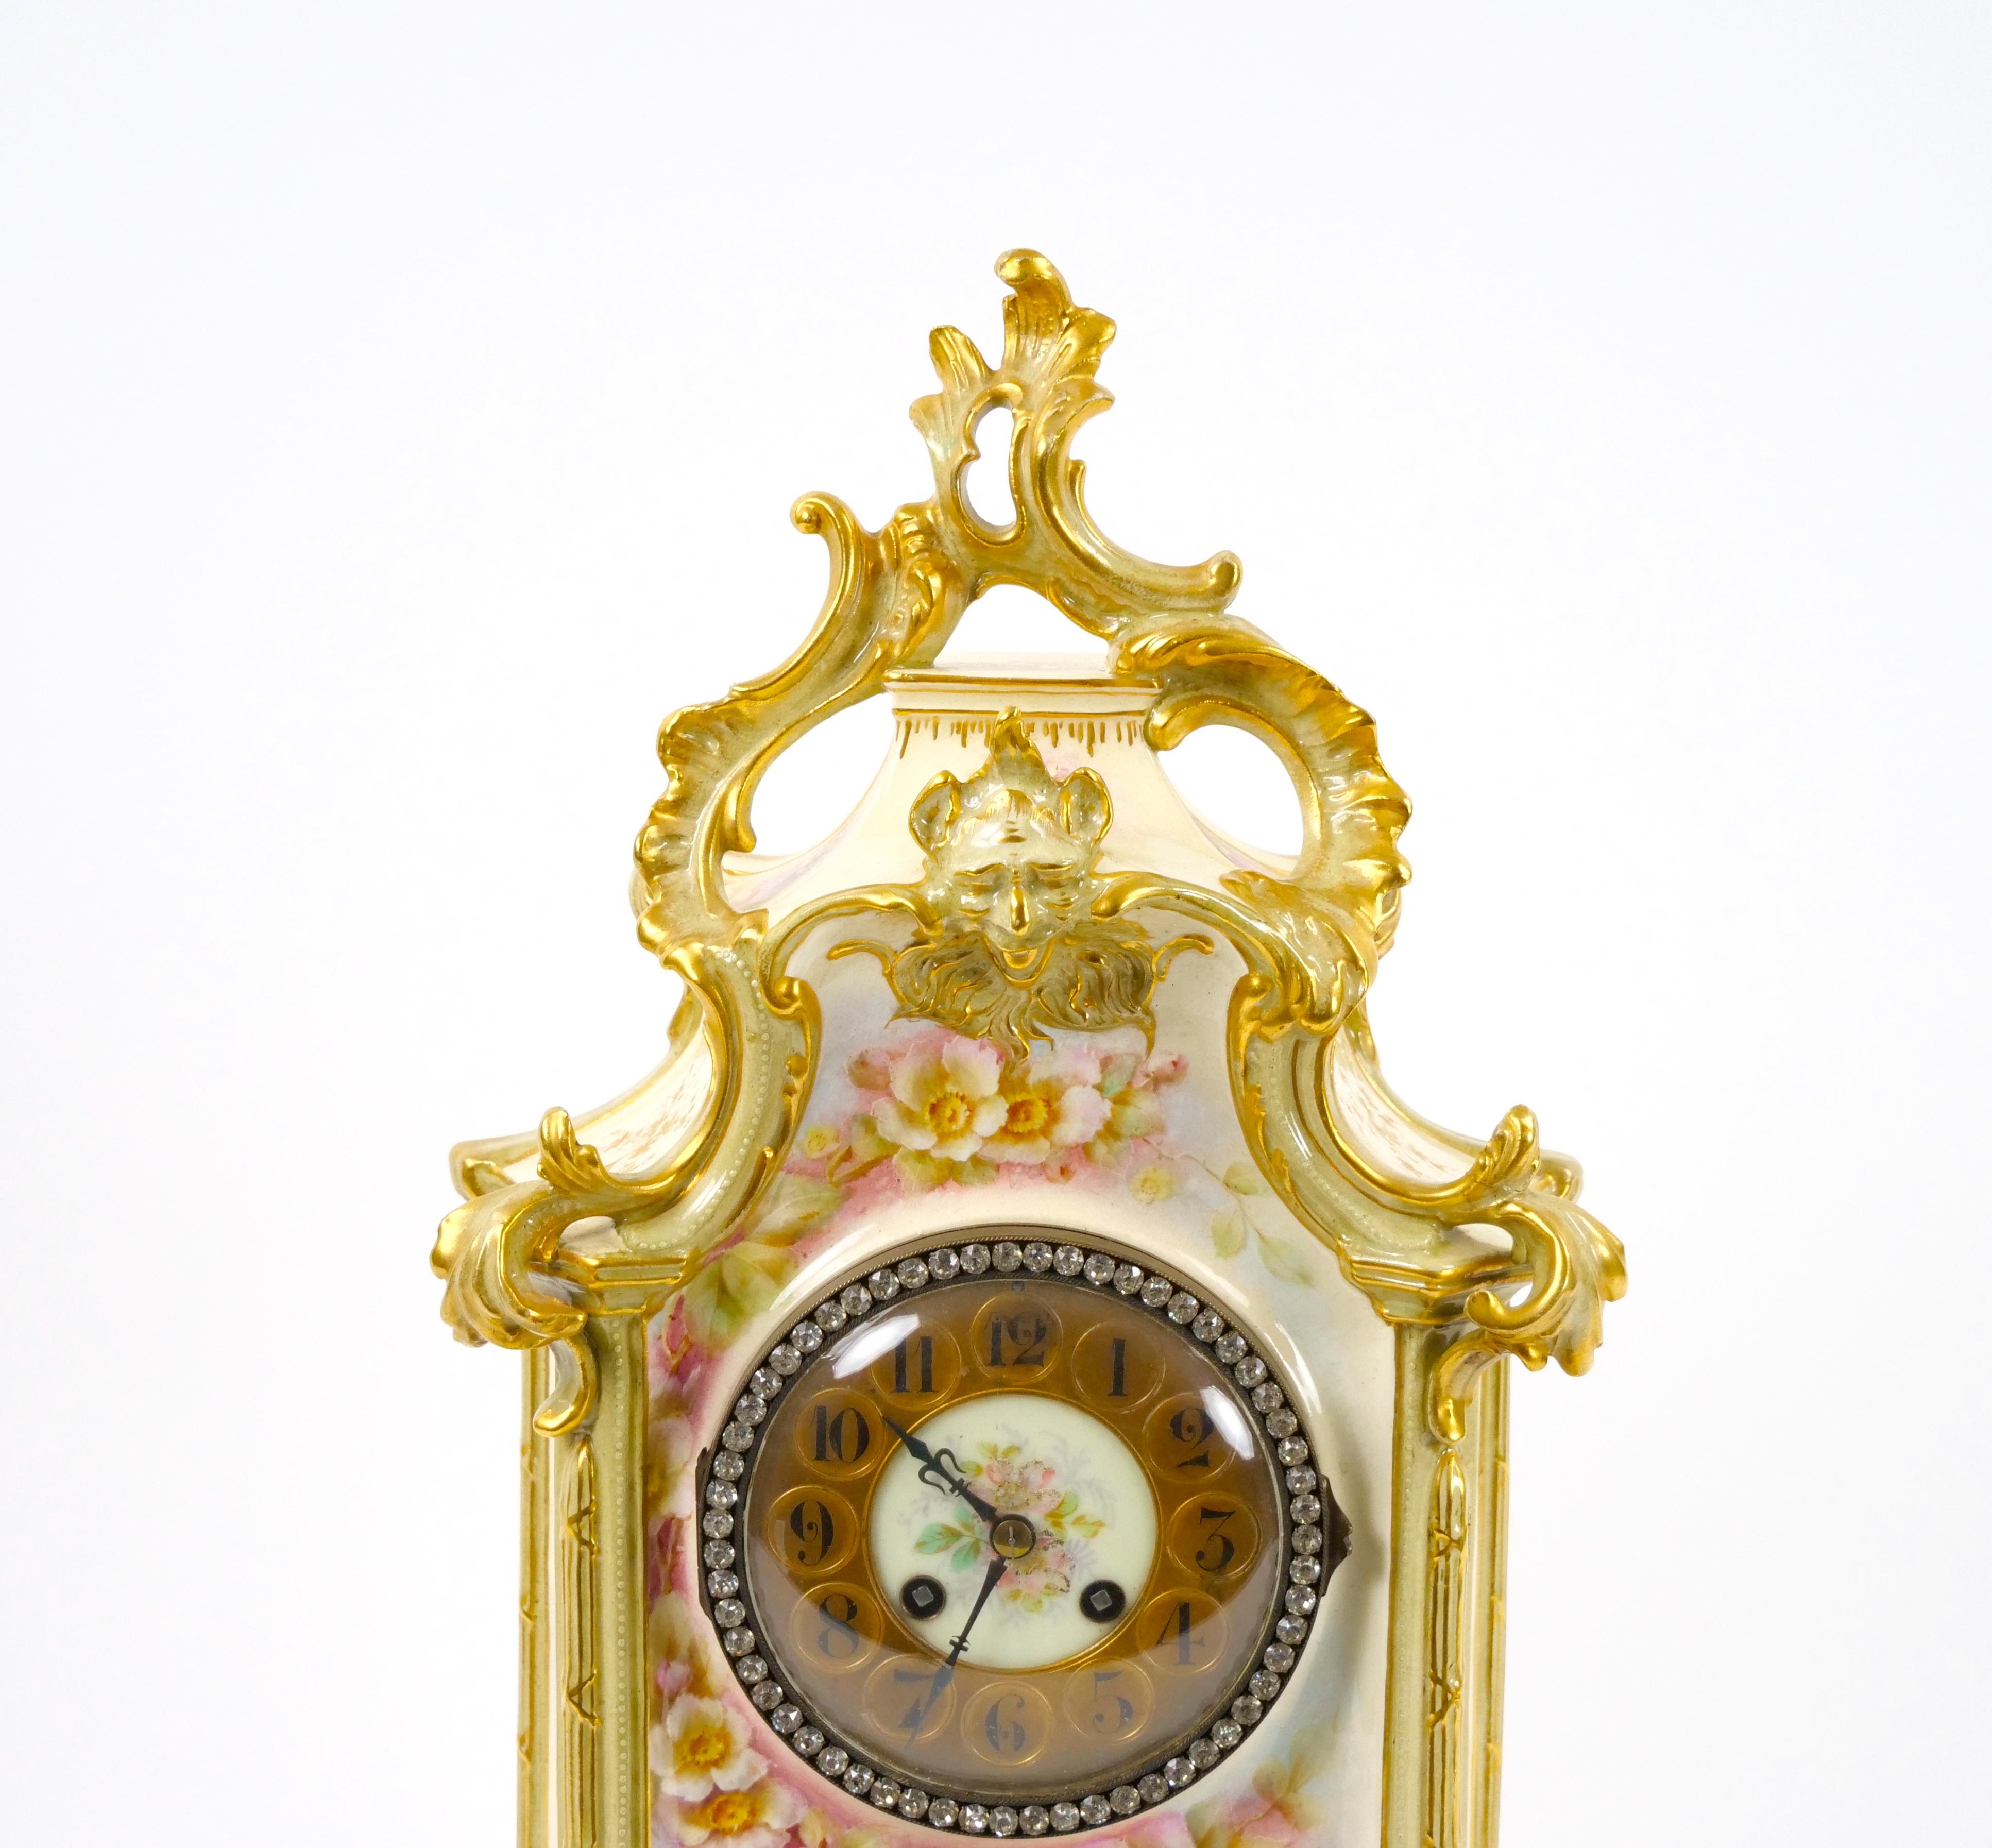 19th Century French Hand Painted/Gilt Decorated Porcelain Mantel Clock 6